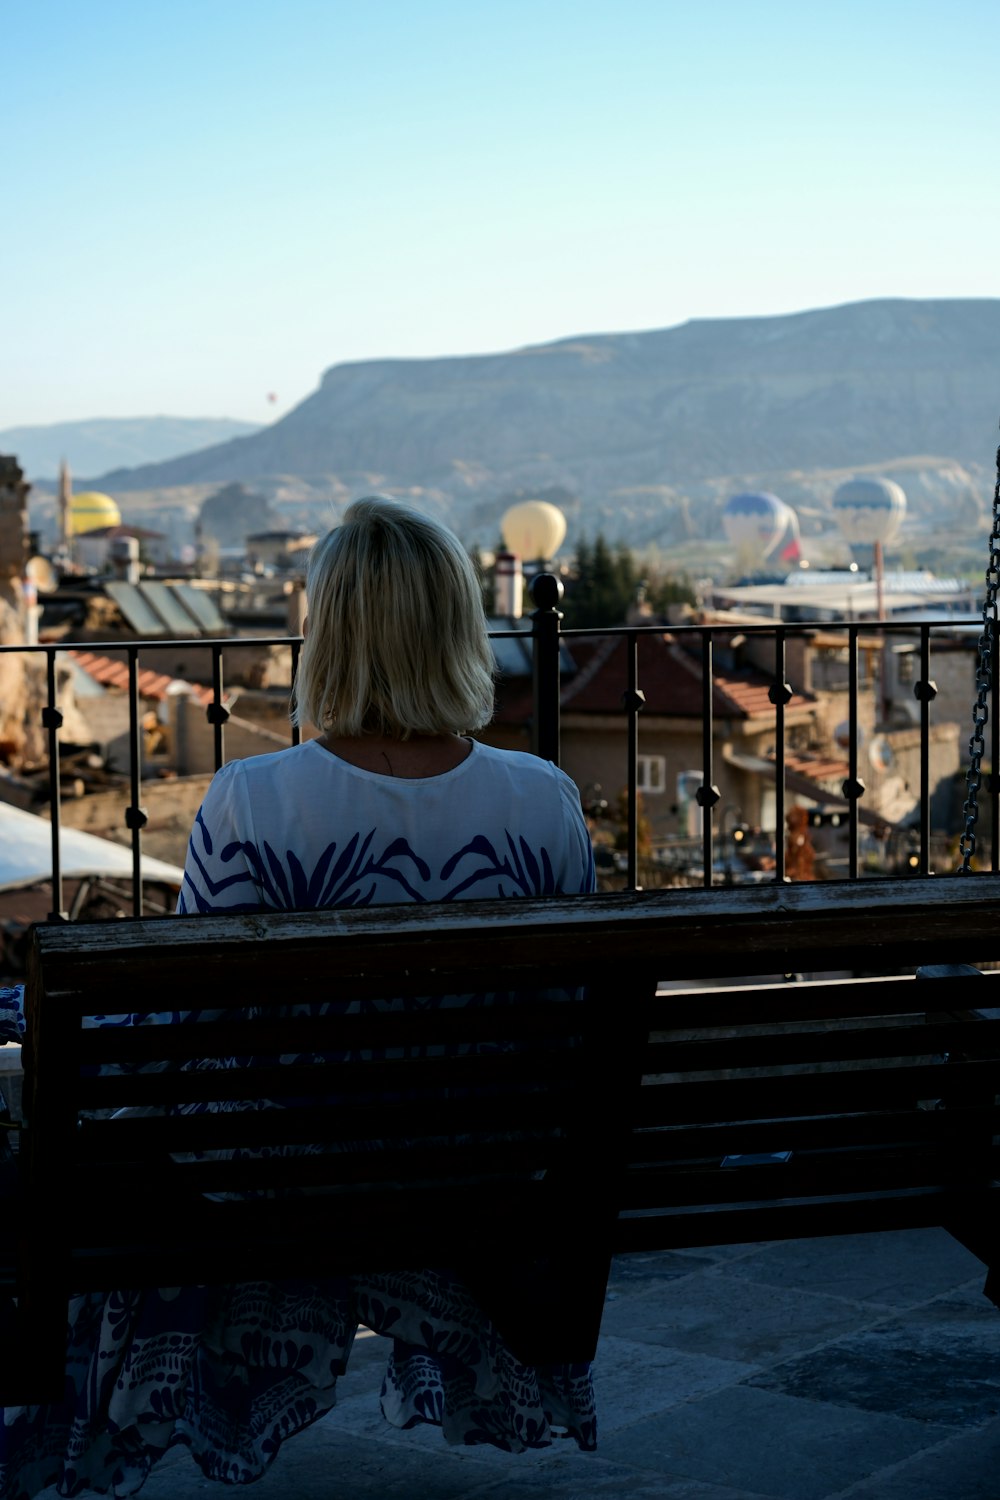 a woman sitting on a bench overlooking a city